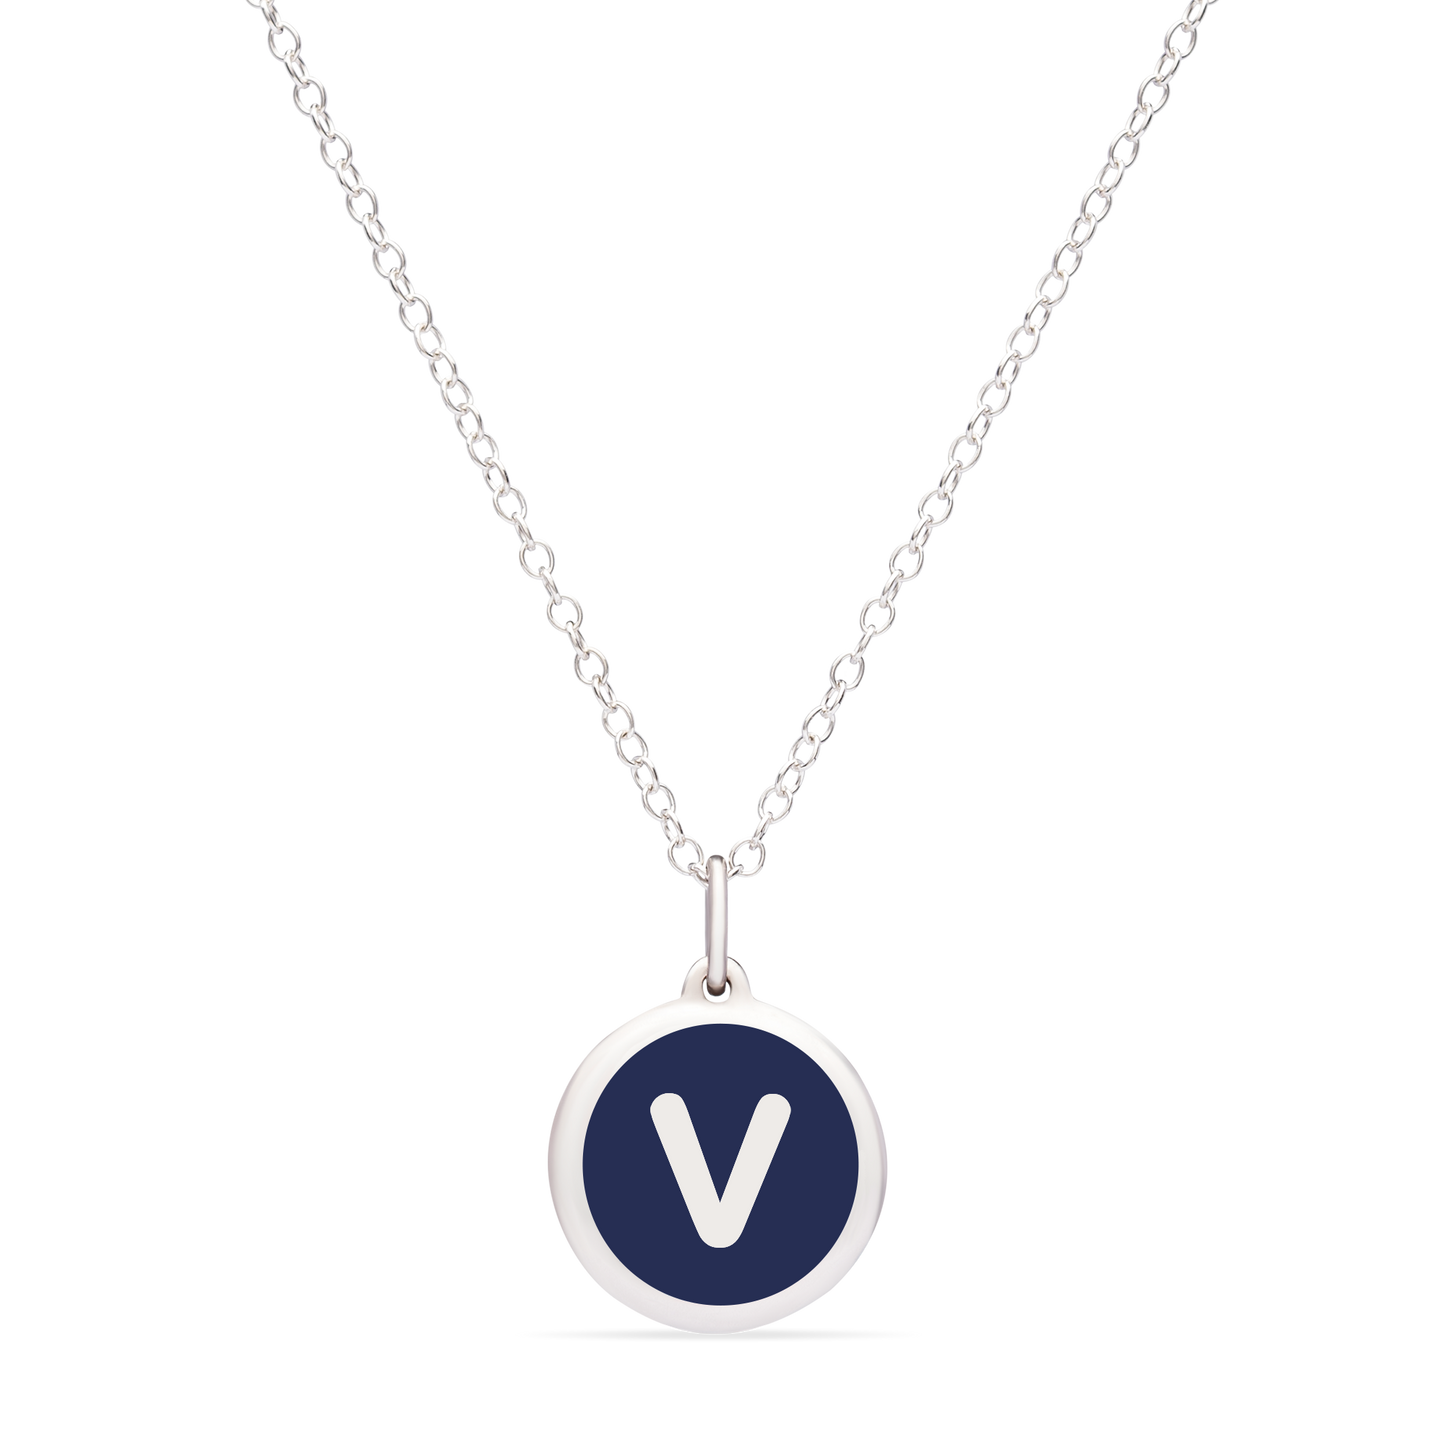 MINI INITIAL 'v' CHARM sterling silver with rhodium plate